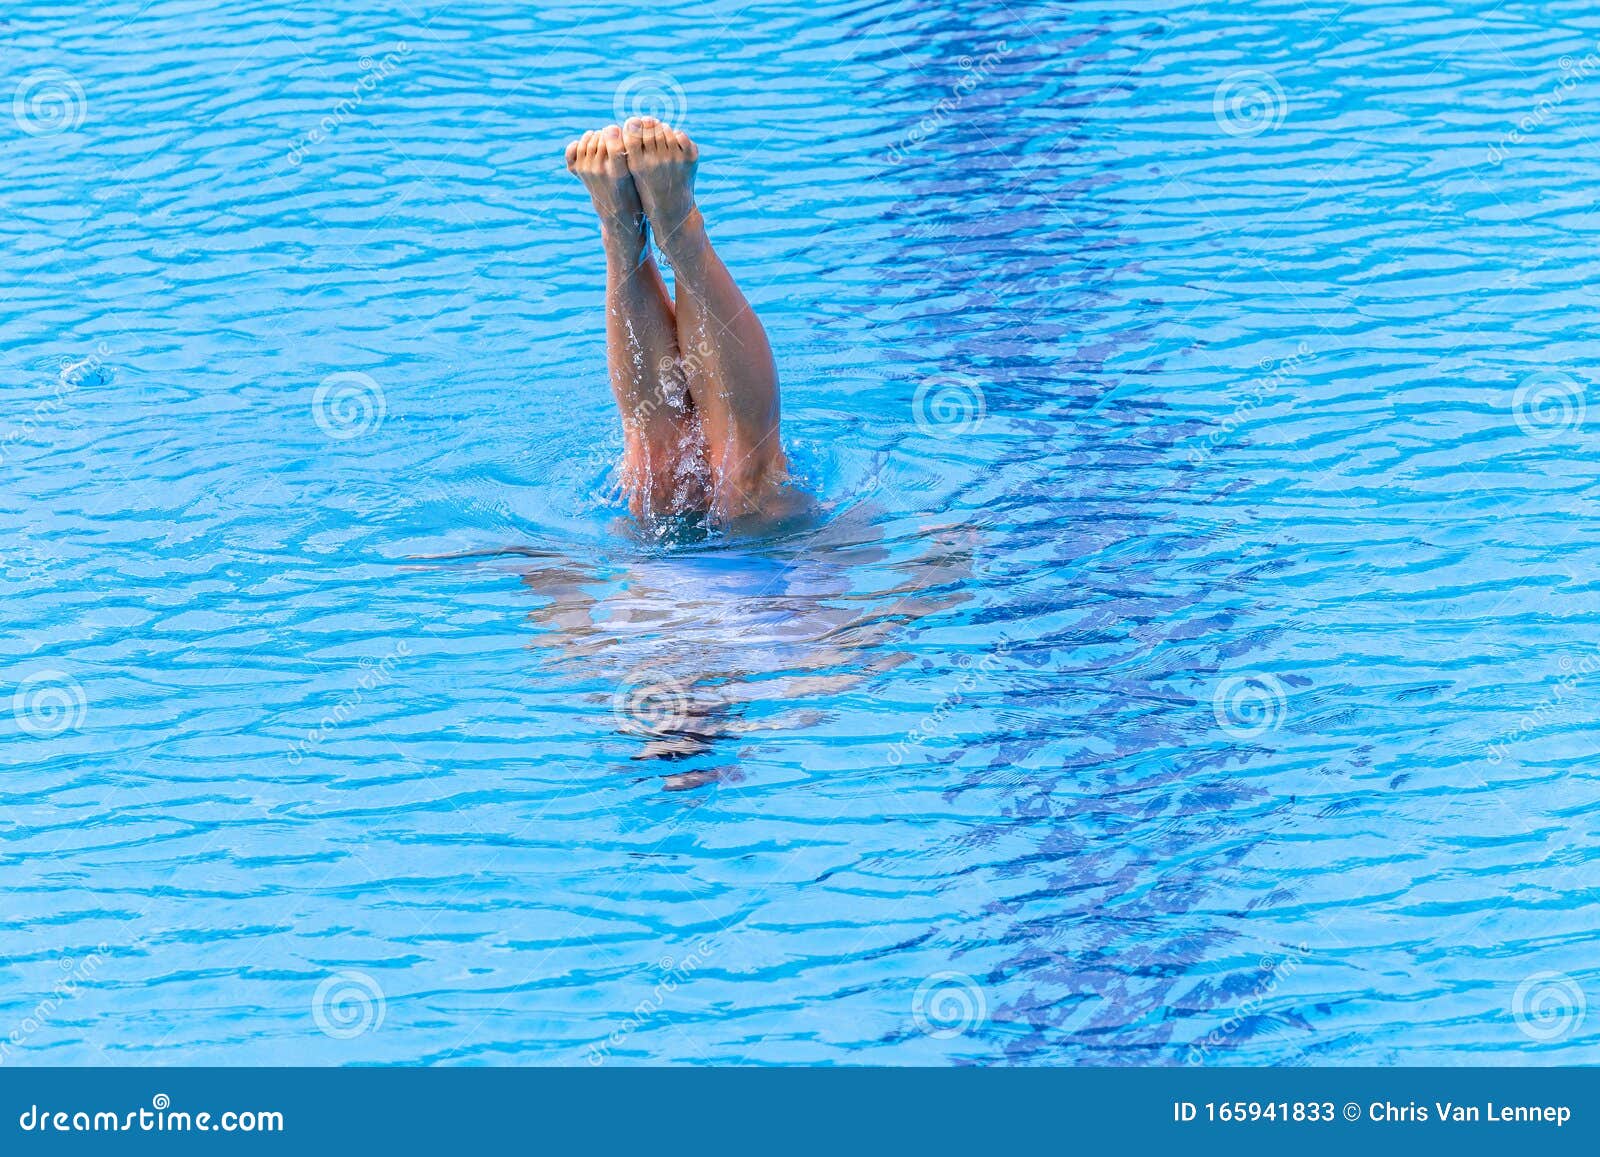 Woman Wearing A White Dress Underwater Royalty Free Stock 